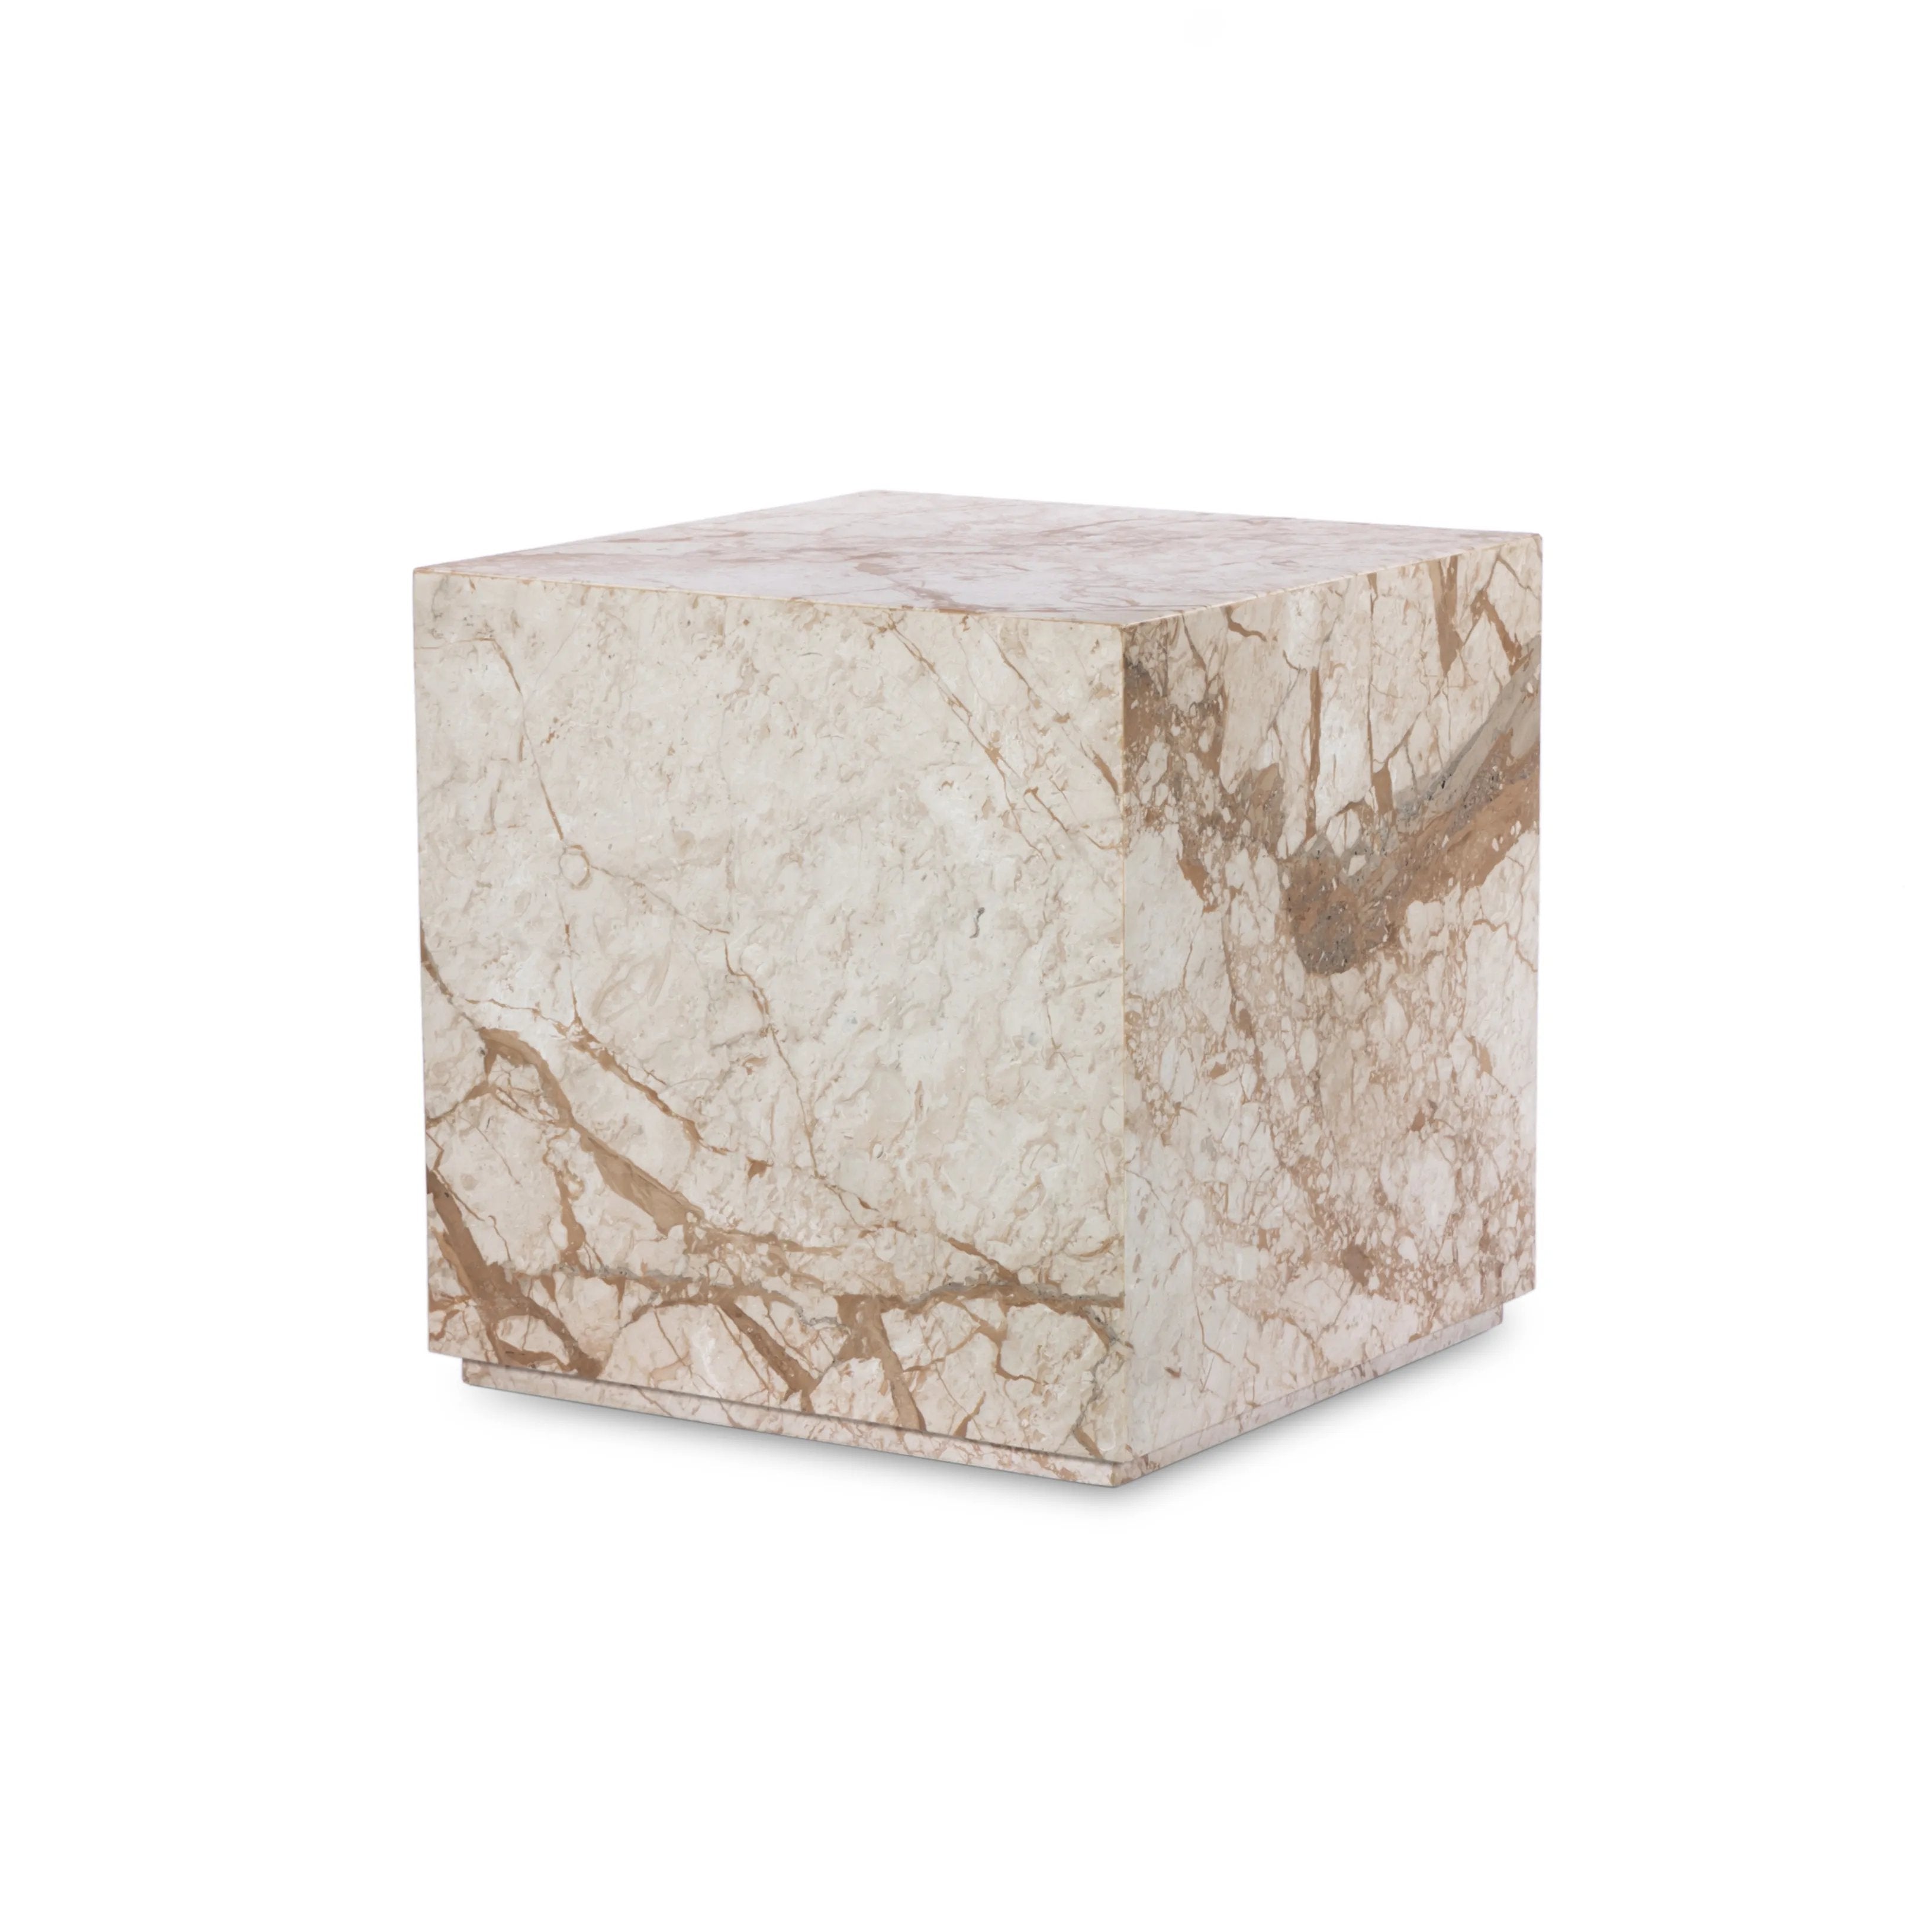 Taupe marble shapes a cubed, plinth-style end table that can be styled just about anywhere.Collection: Elemen Amethyst Home provides interior design, new home construction design consulting, vintage area rugs, and lighting in the Austin metro area.